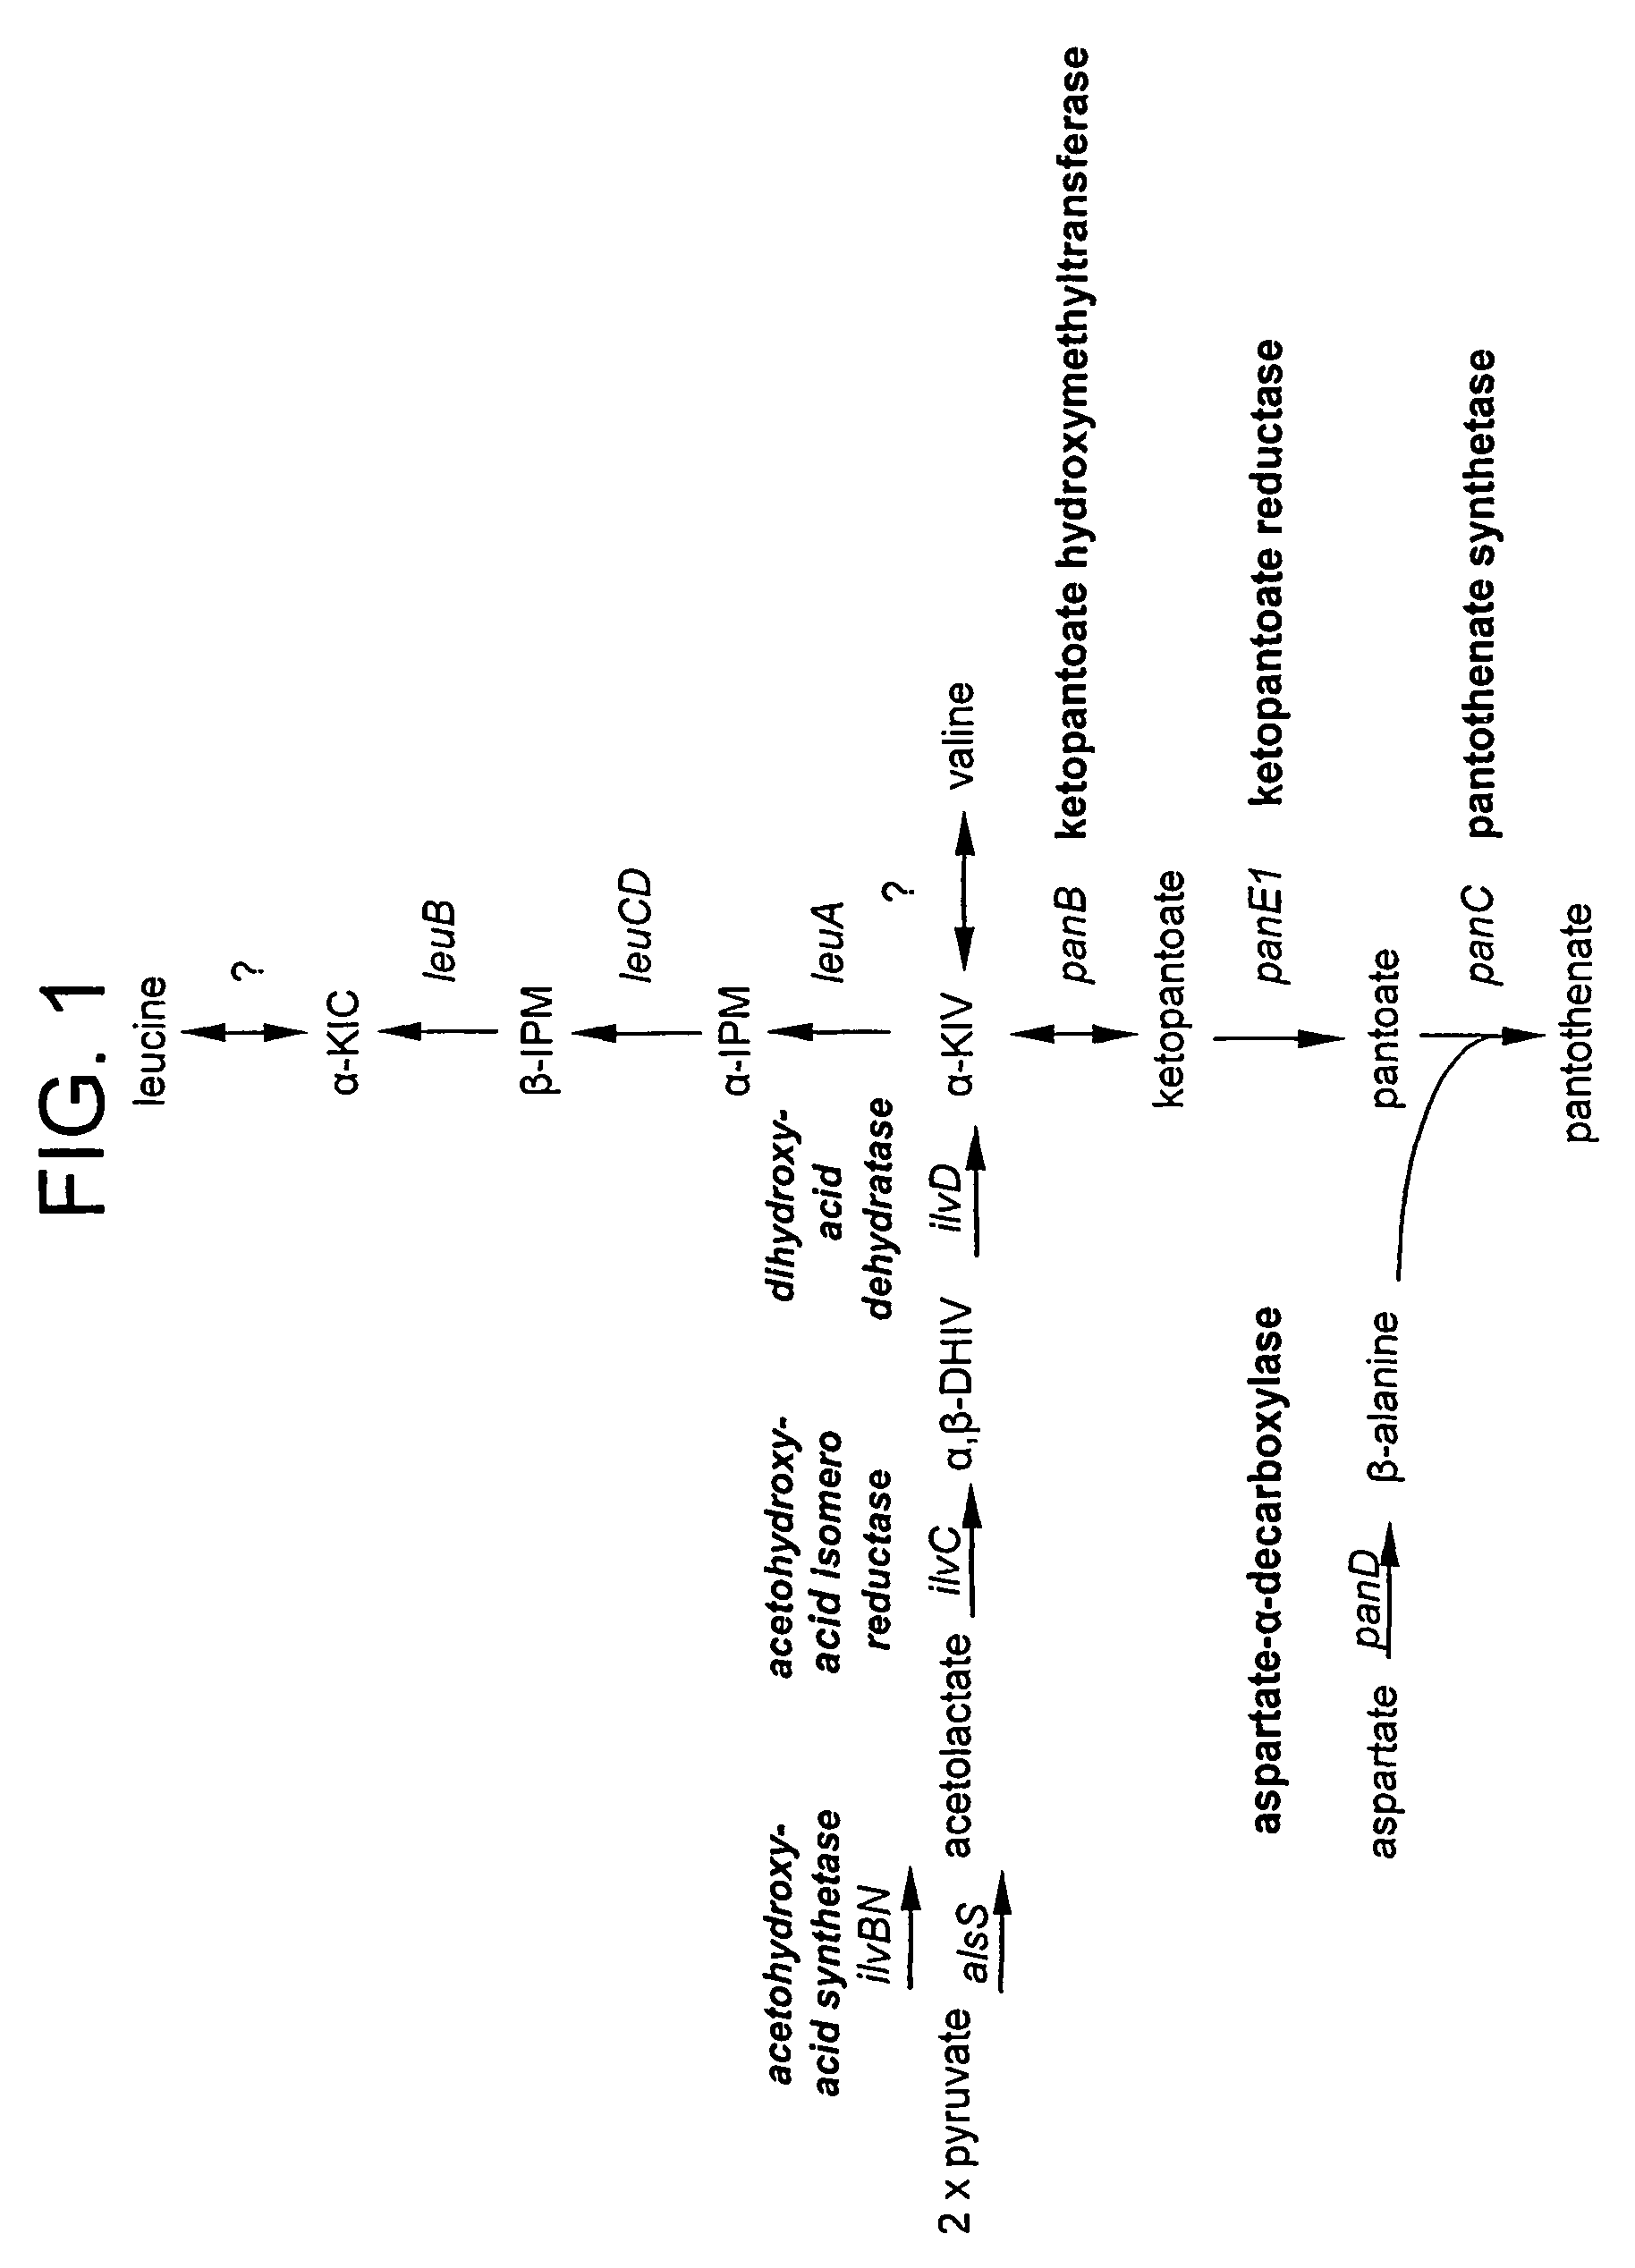 Microorganisms and processes for enhanced production of pantothenate